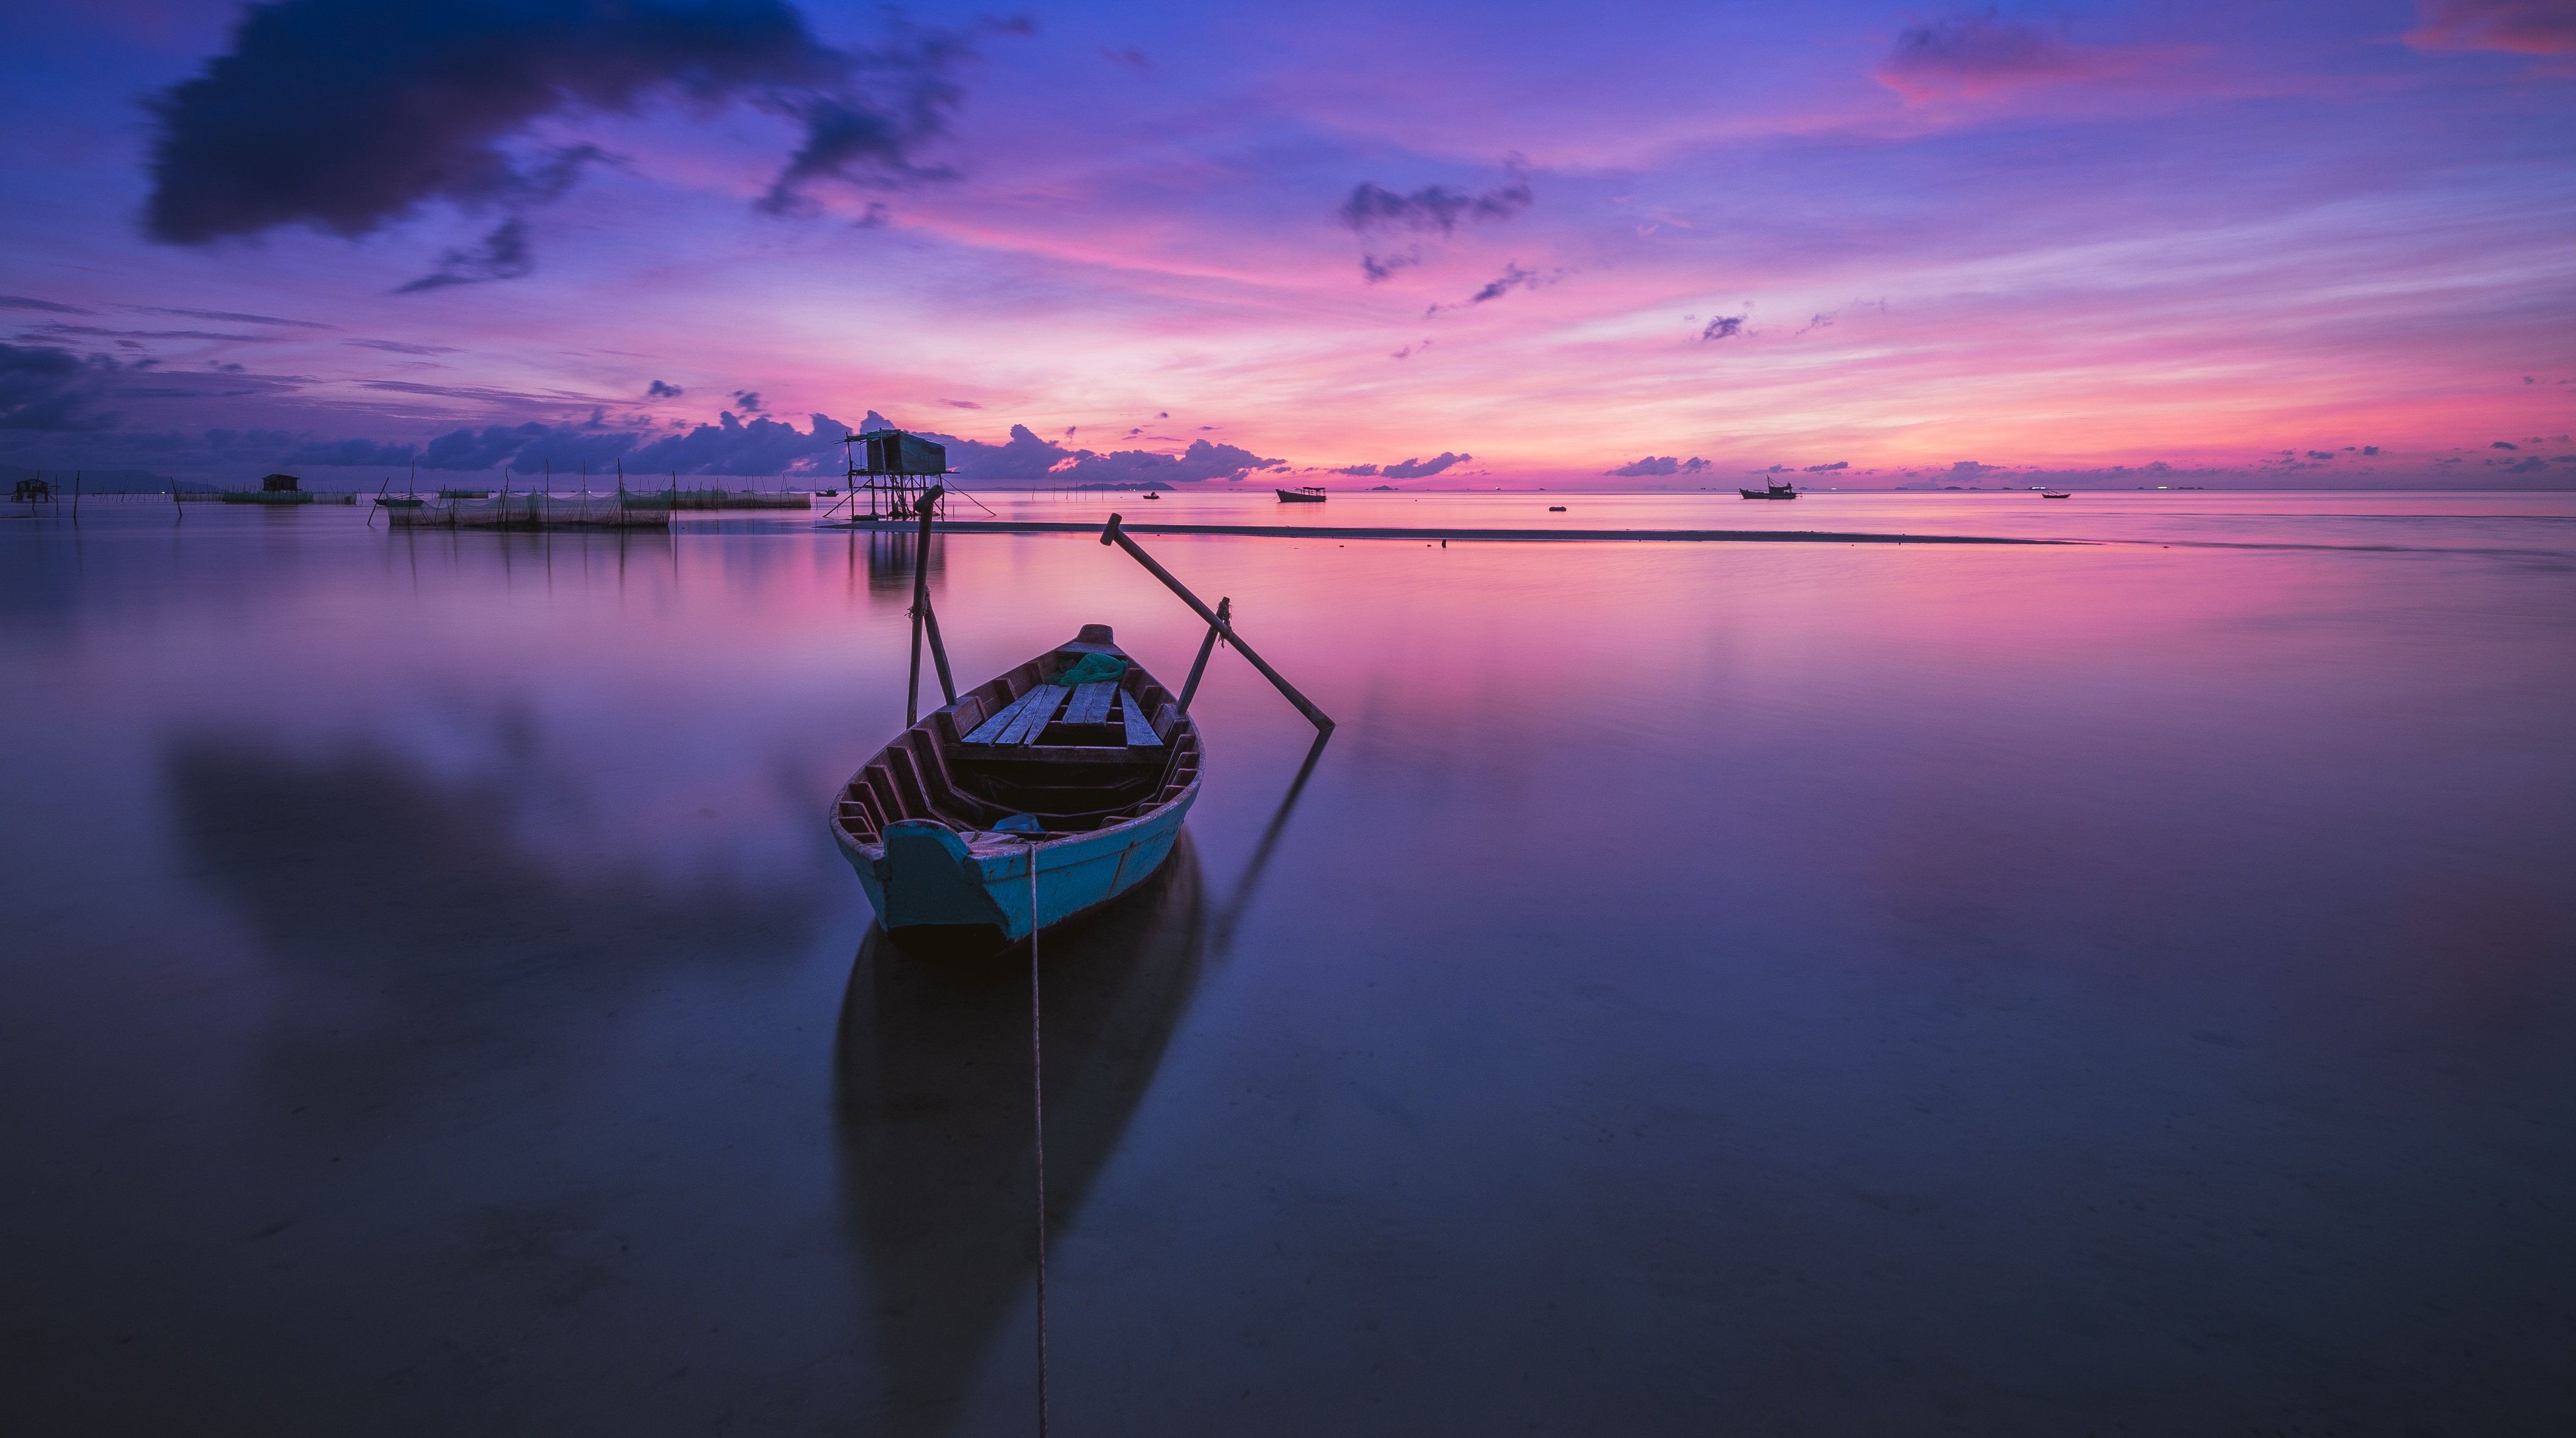 A boat on a lake with a purple sunset